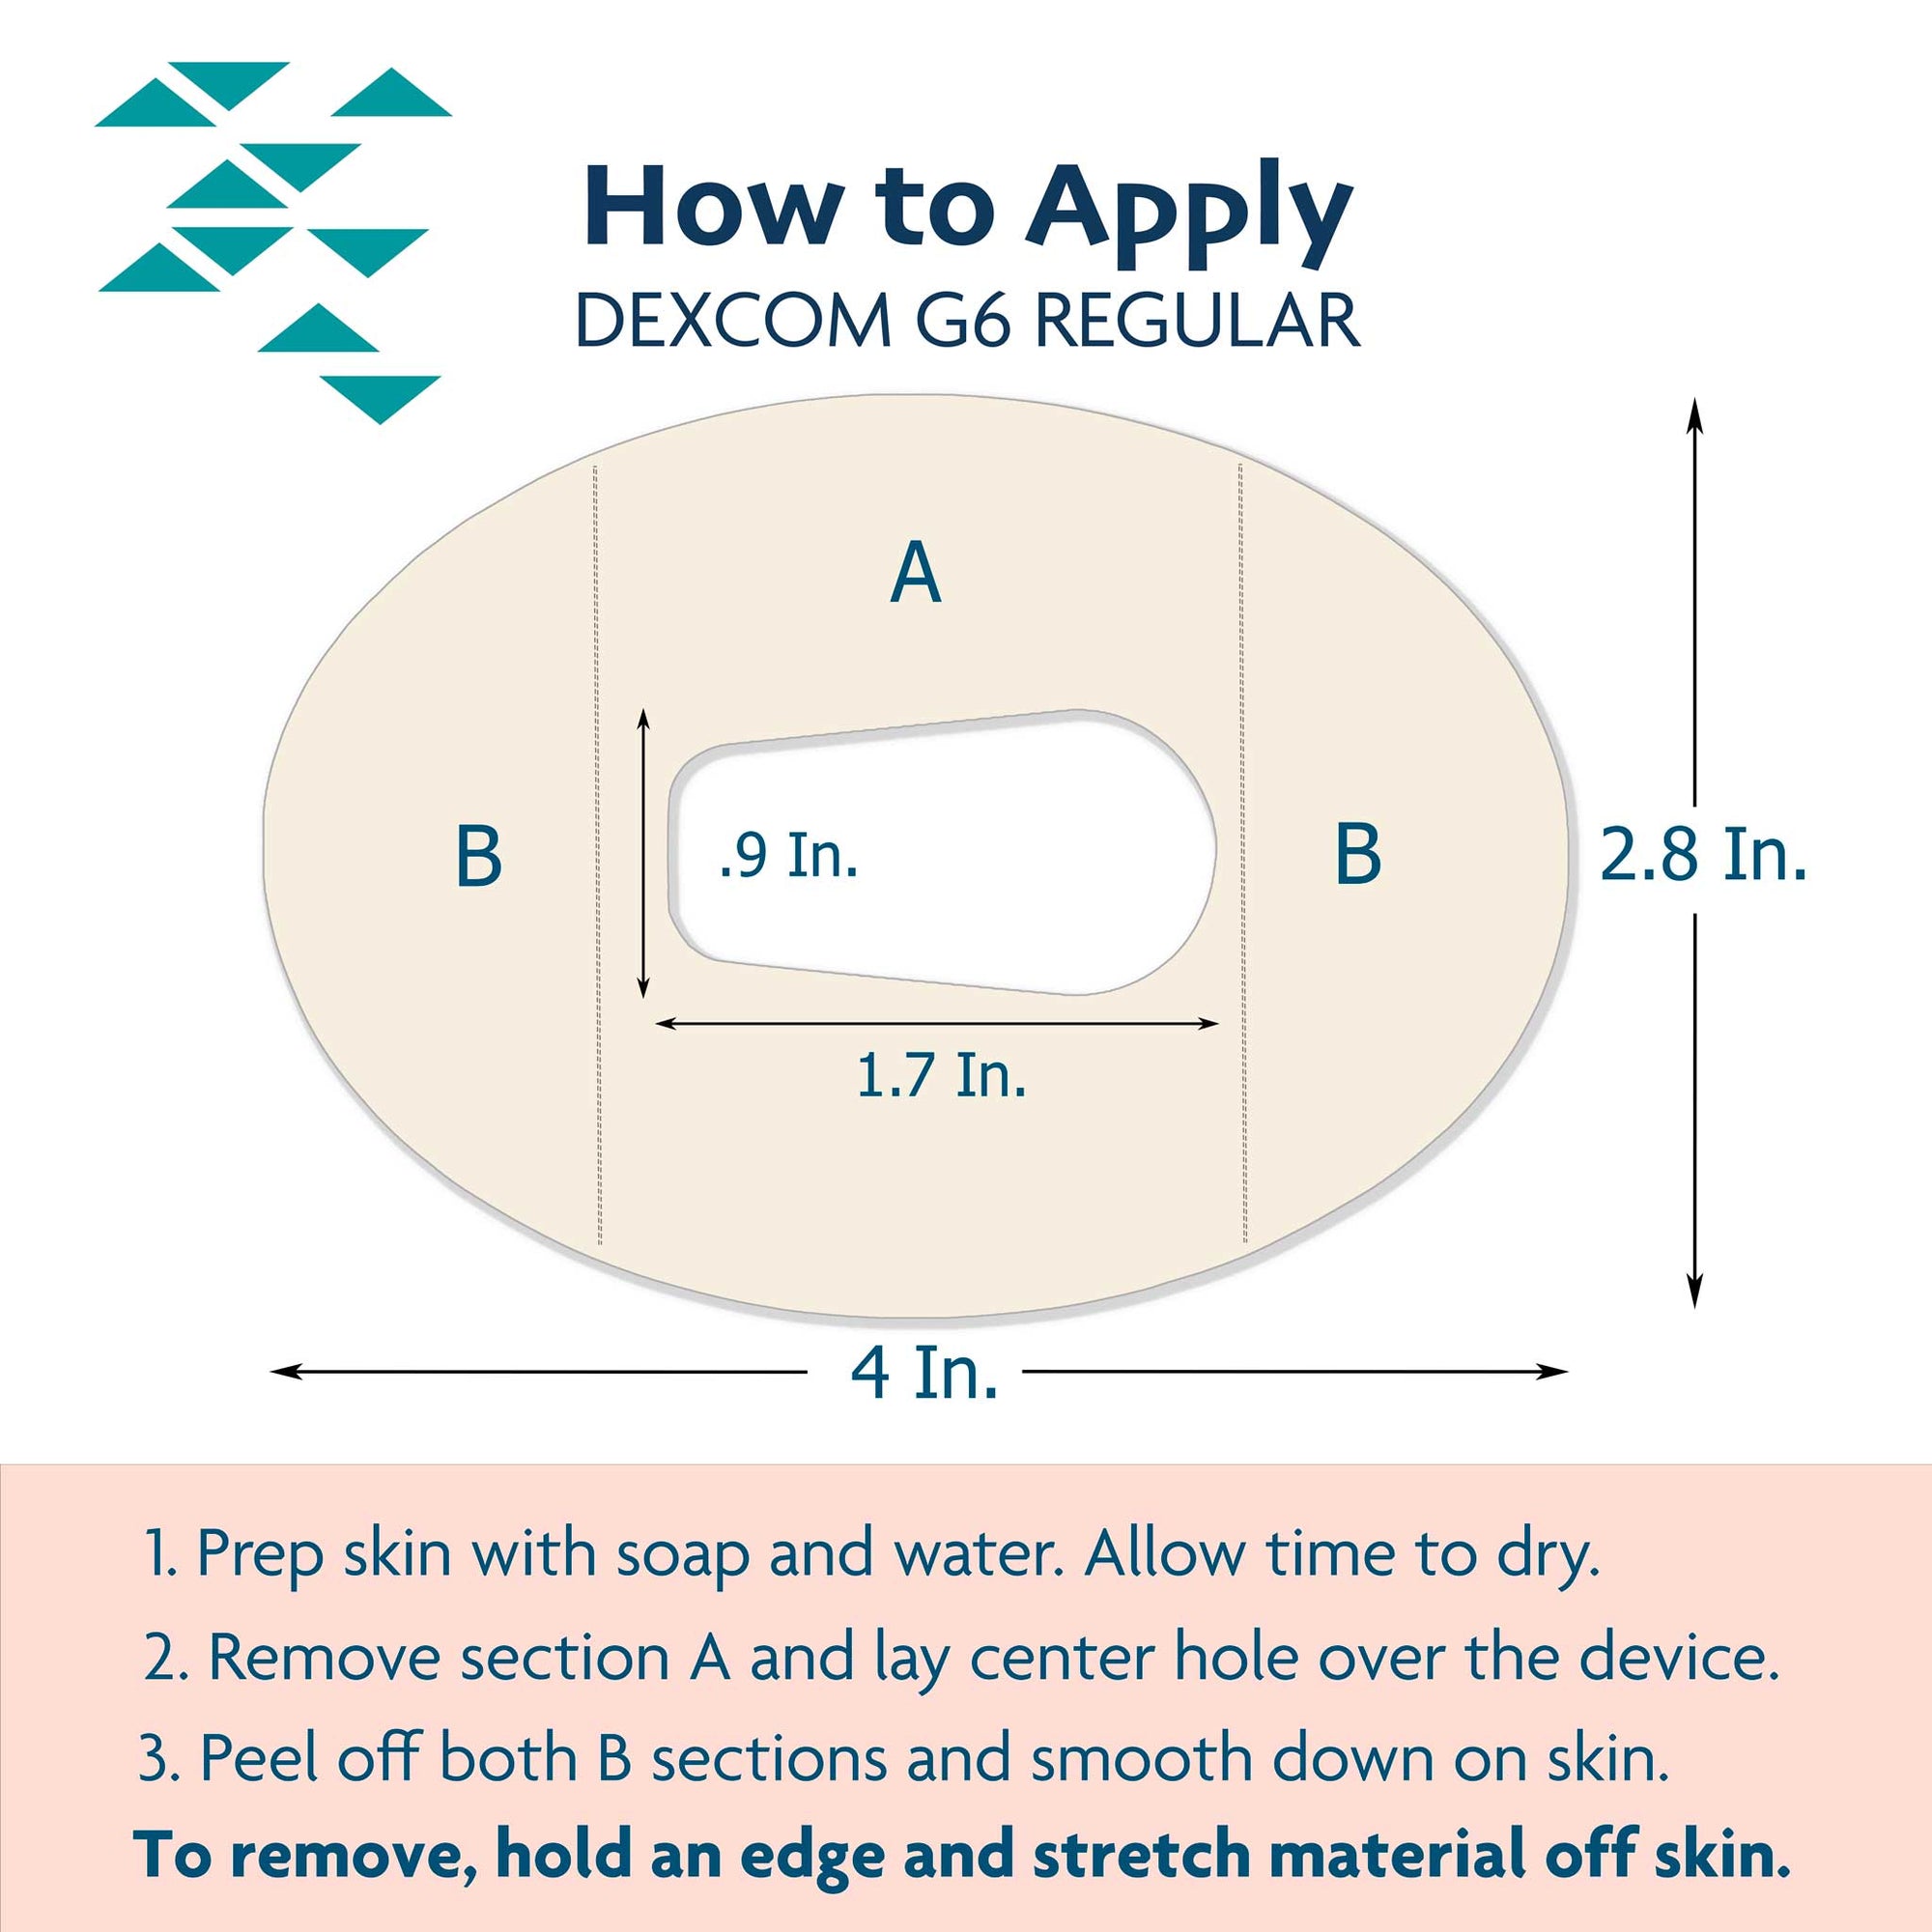 ExpressionMed Great tips to apply Dexcom G6 Overpatch onto CGM device properly